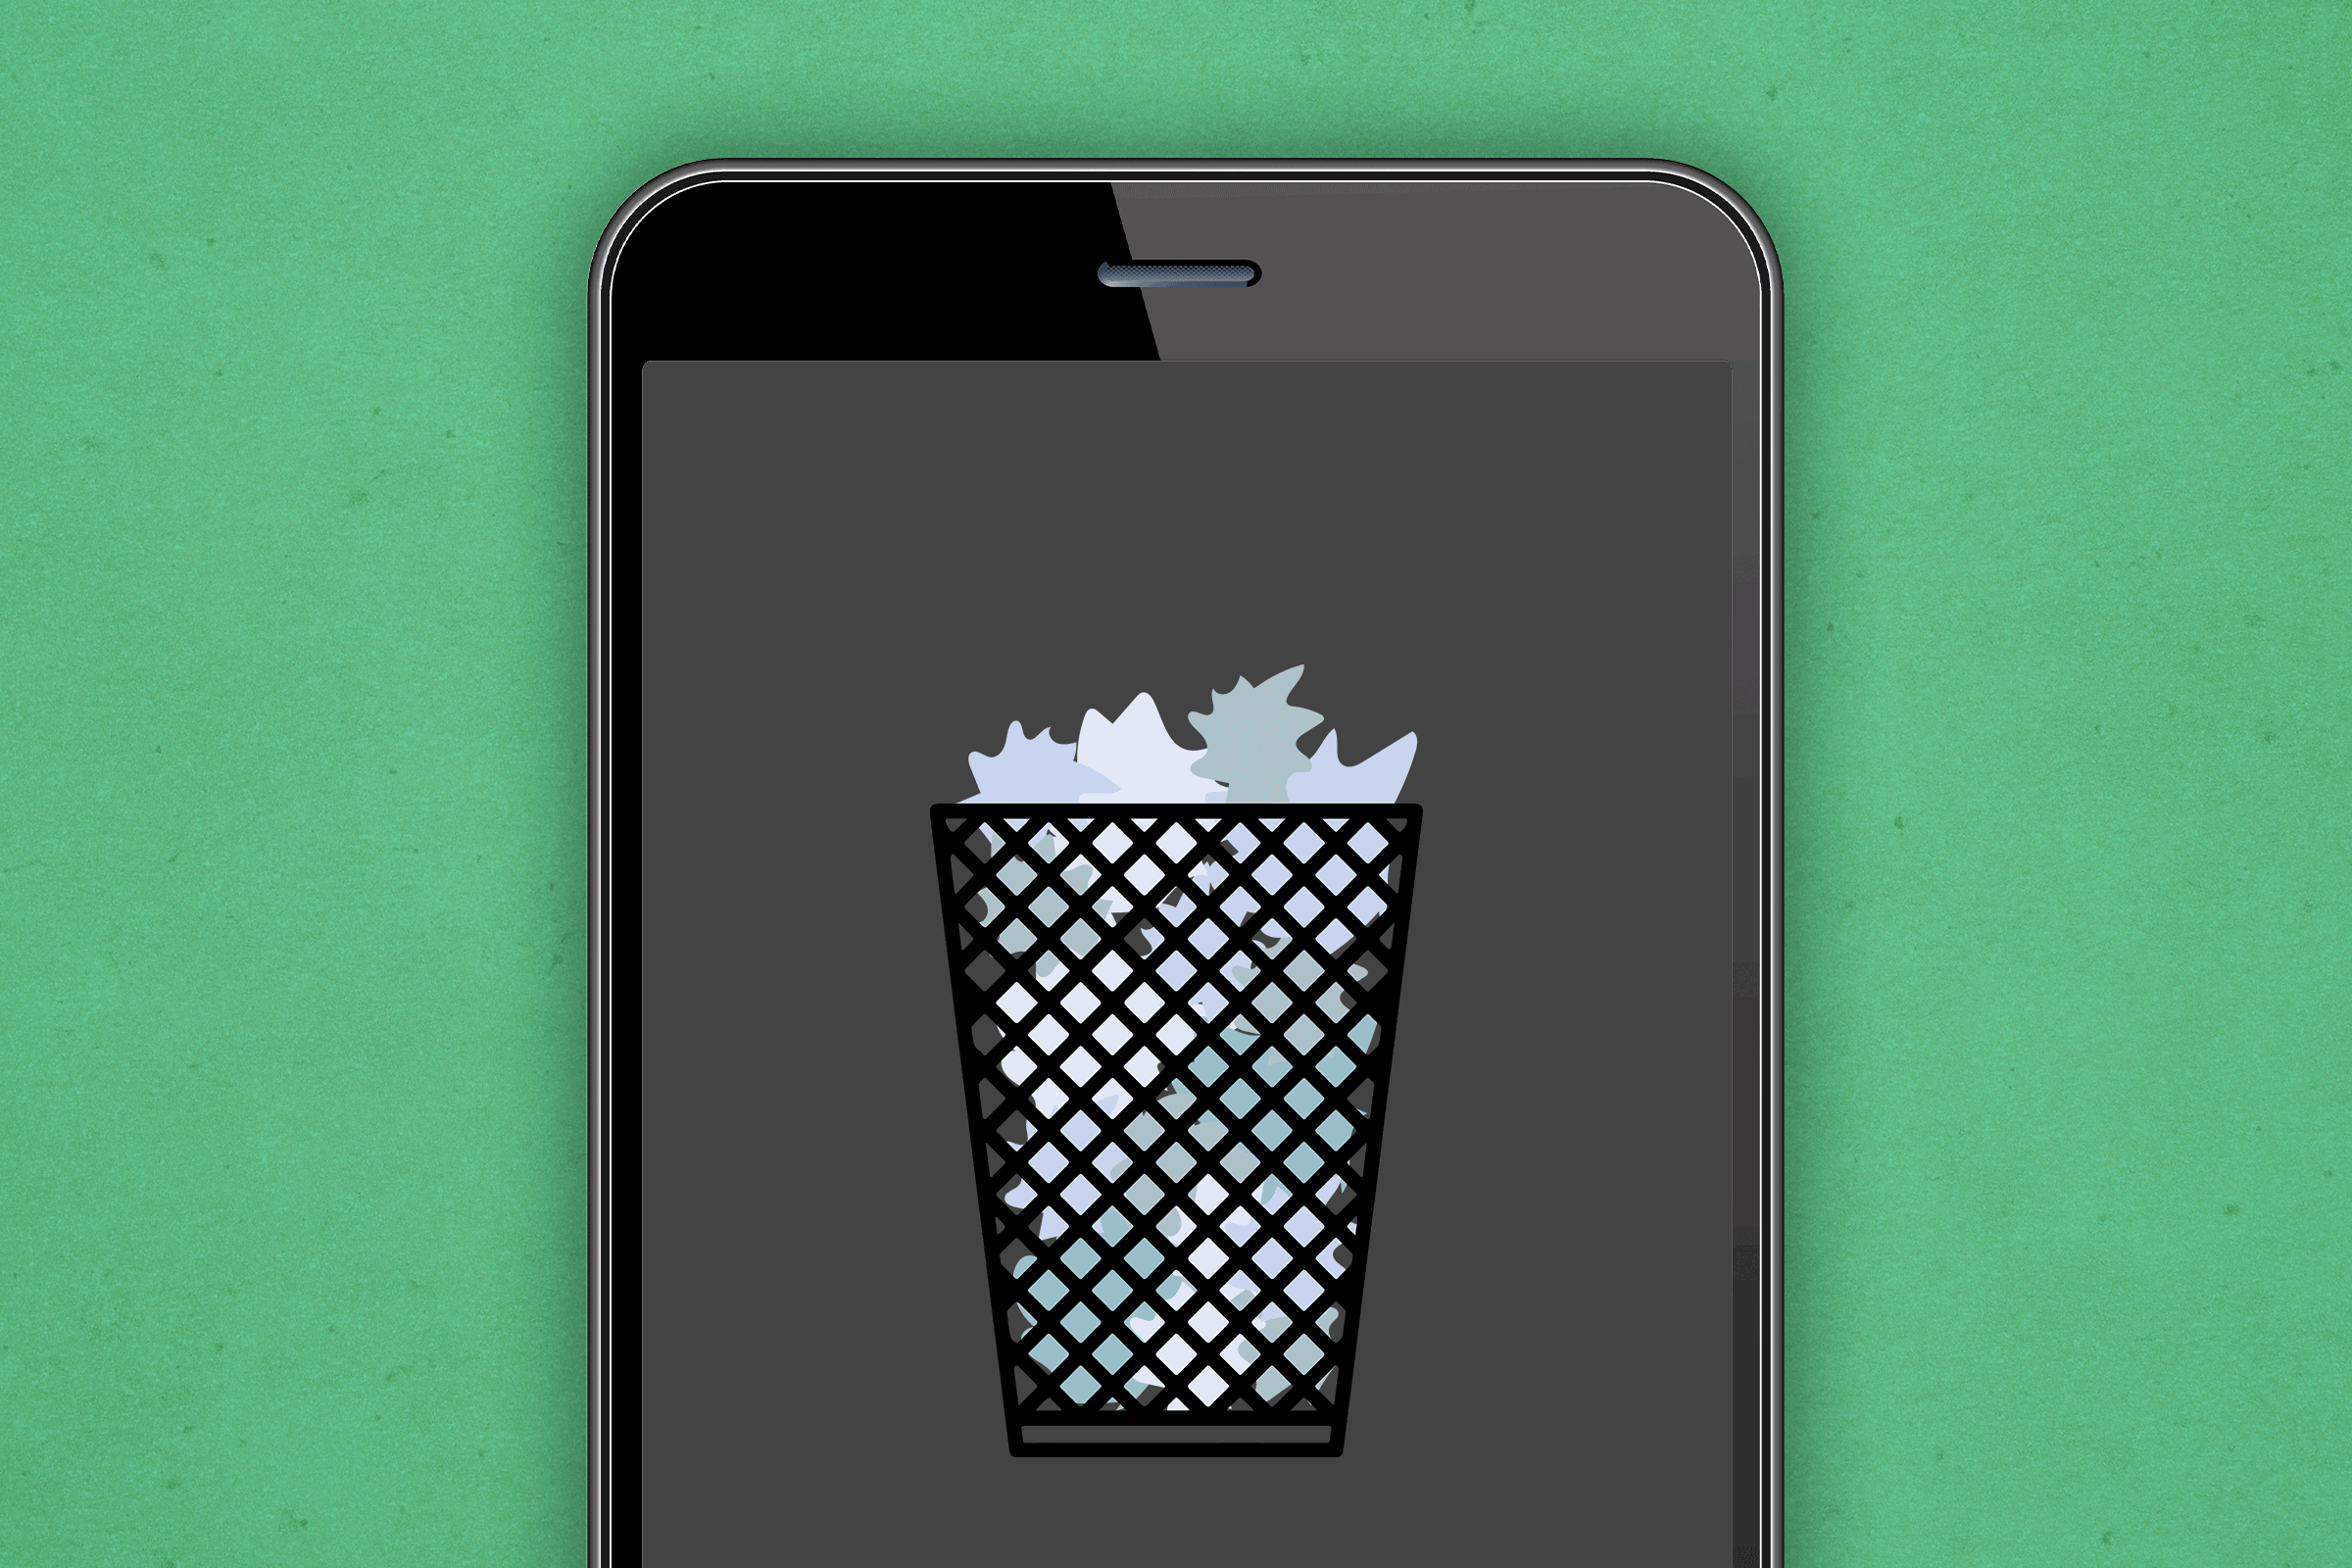 Animation of emptying trashcan on phone